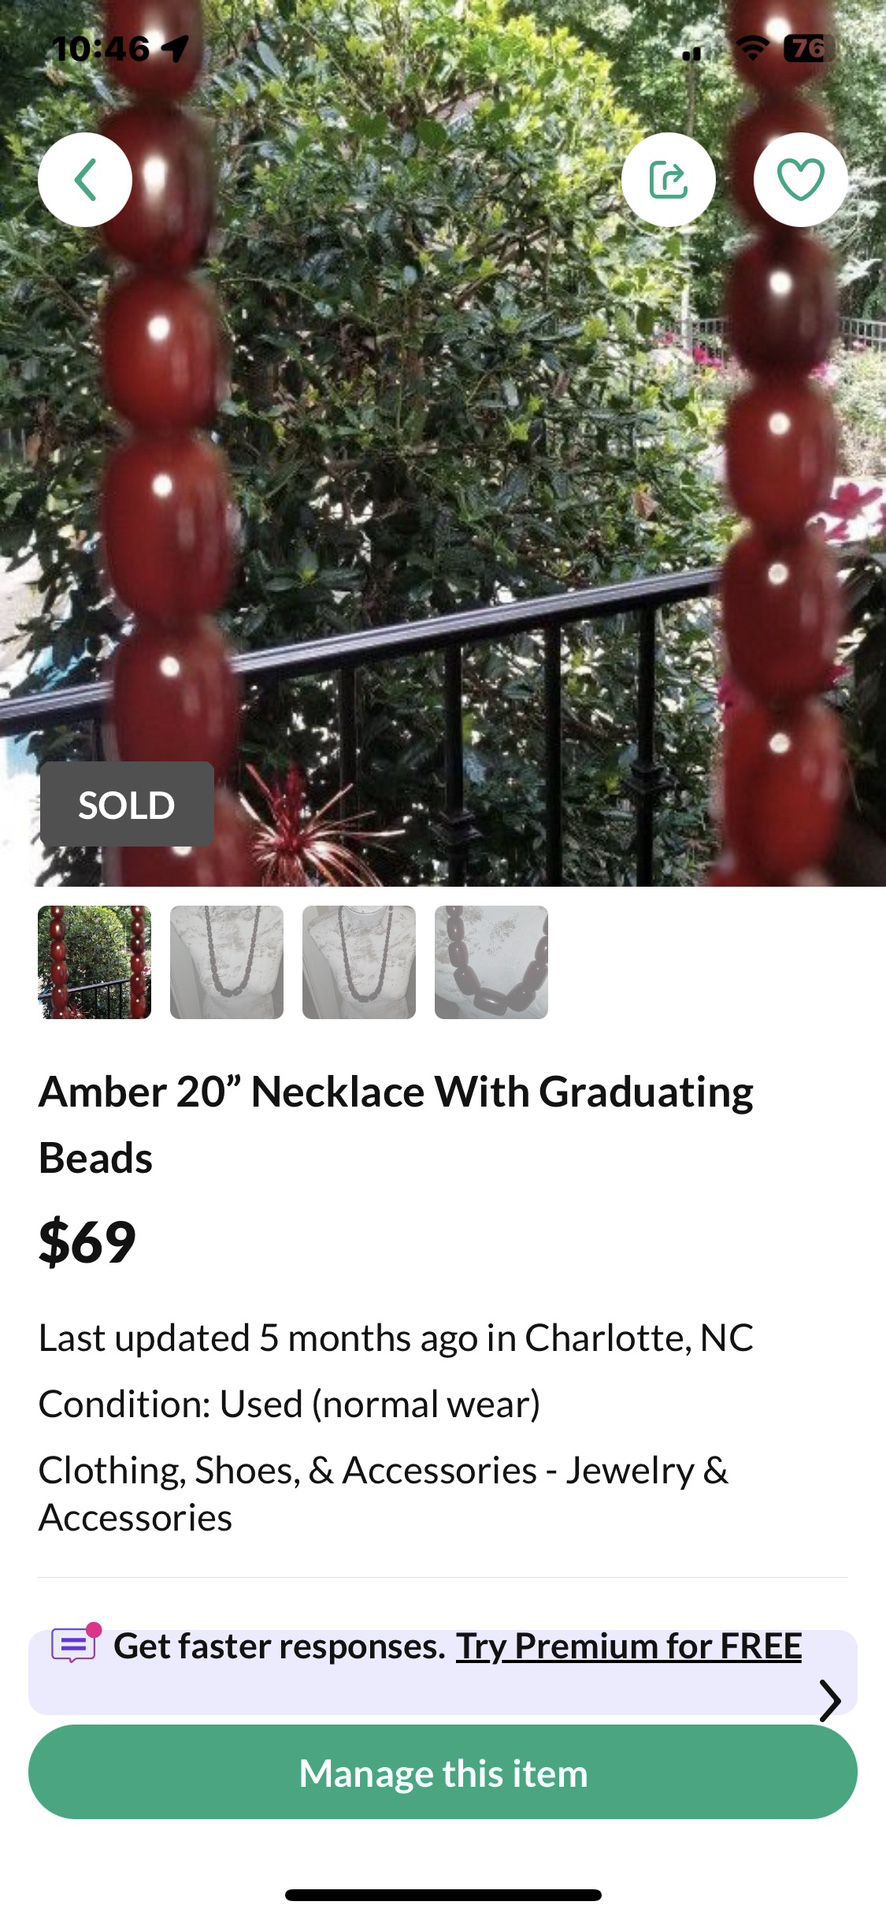 Not Sold! Have 1 More! Amber 20” Necklace With Graduating Beads